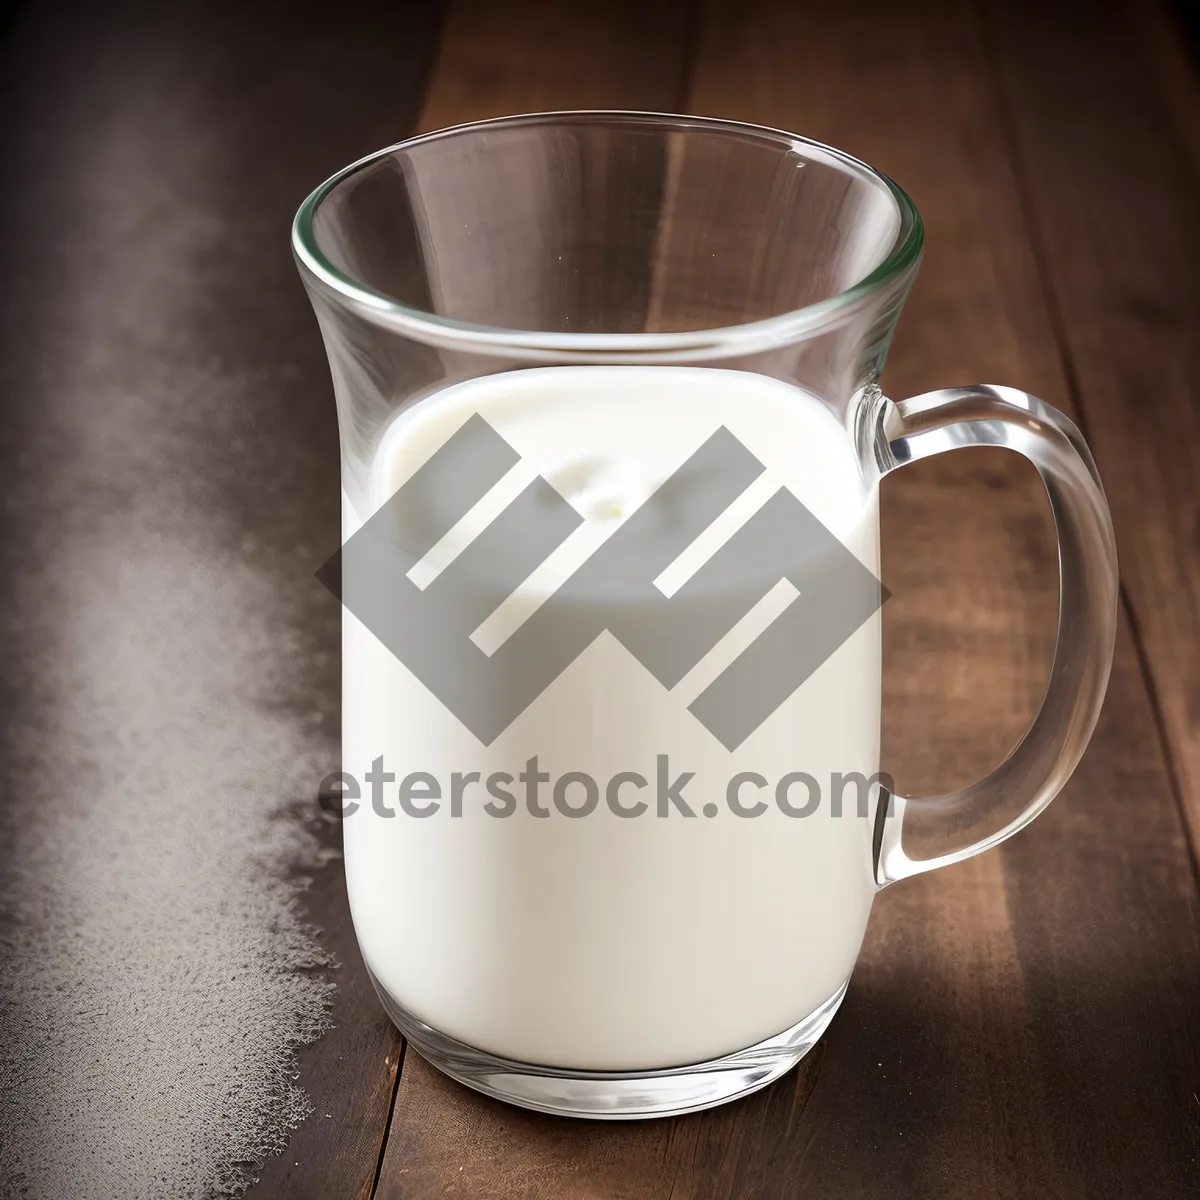 Picture of Milk-filled Coffee Cup on Saucer